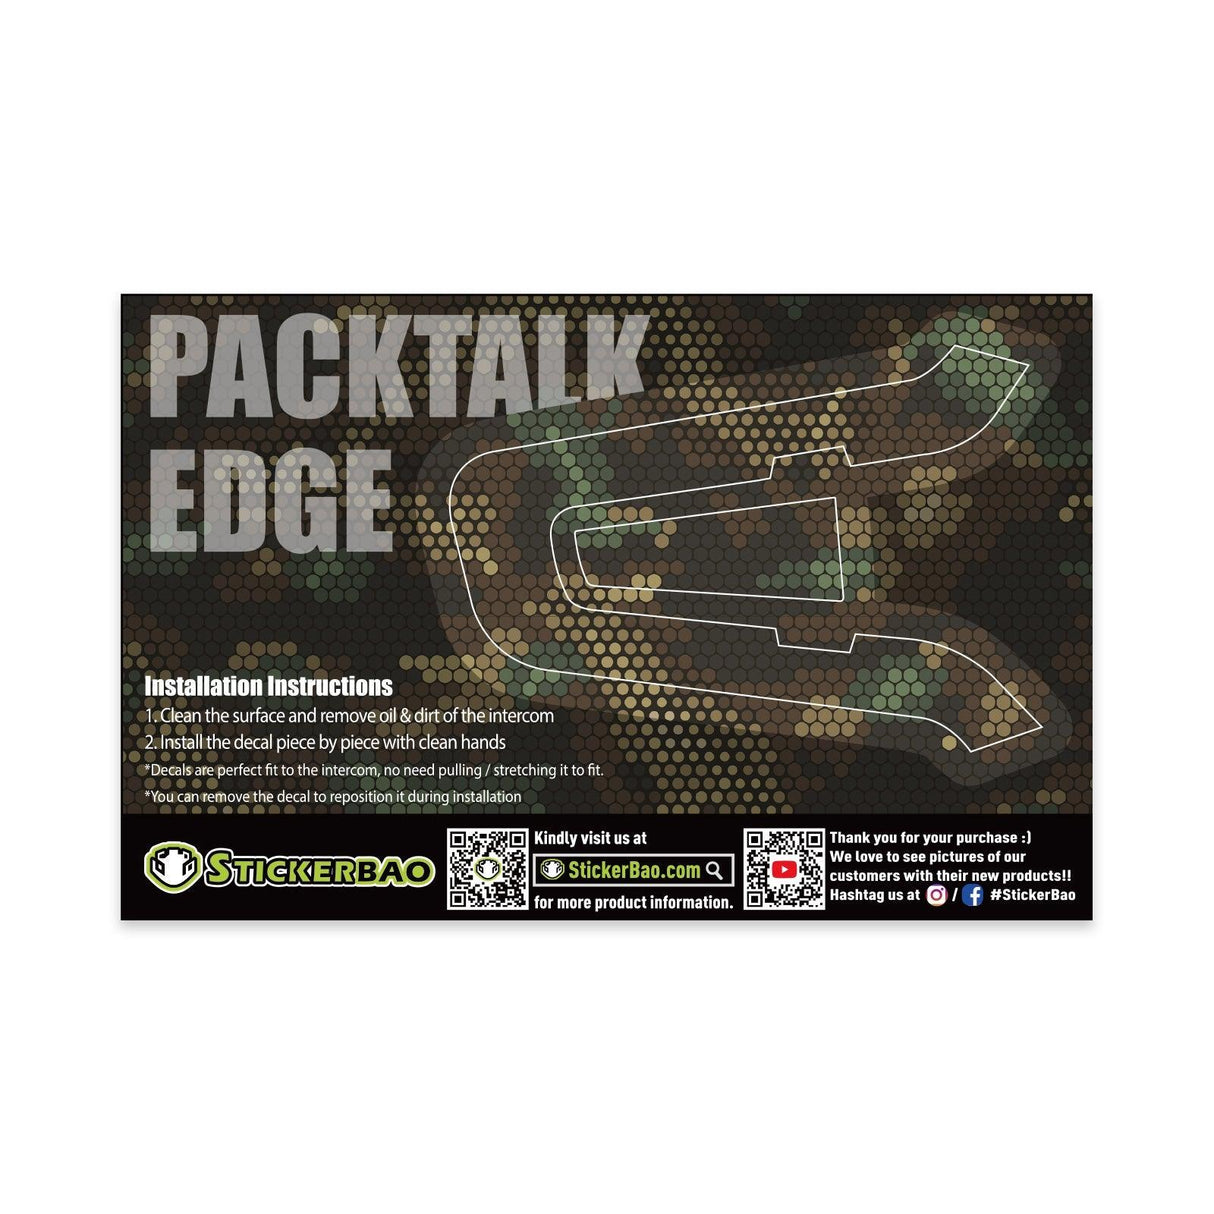 For Cardo Packtalk Edge Use Protection Decal Stickers - Motorcycle Accessory - StickerBao Wheel Sticker Store